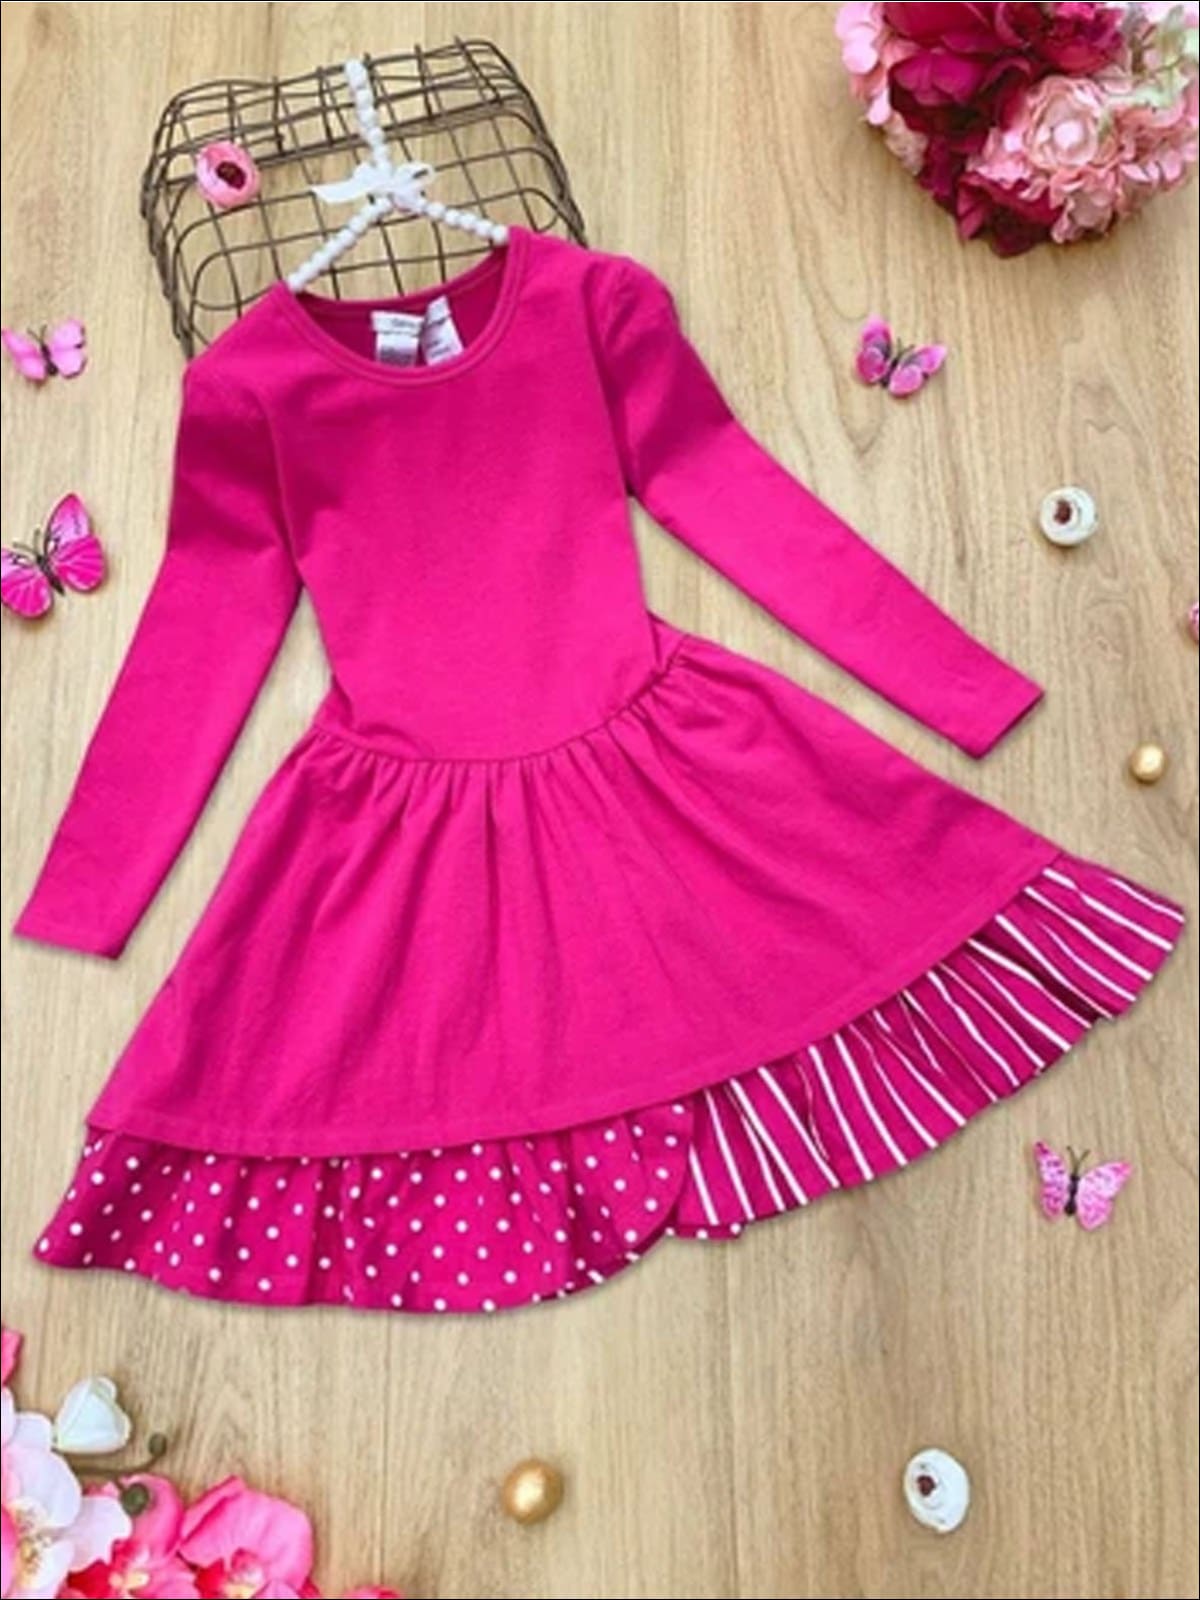 Girls Tiered Polka Dot and Striped Dress - Fuchsia / 5Y - Girls Spring Casual Dress